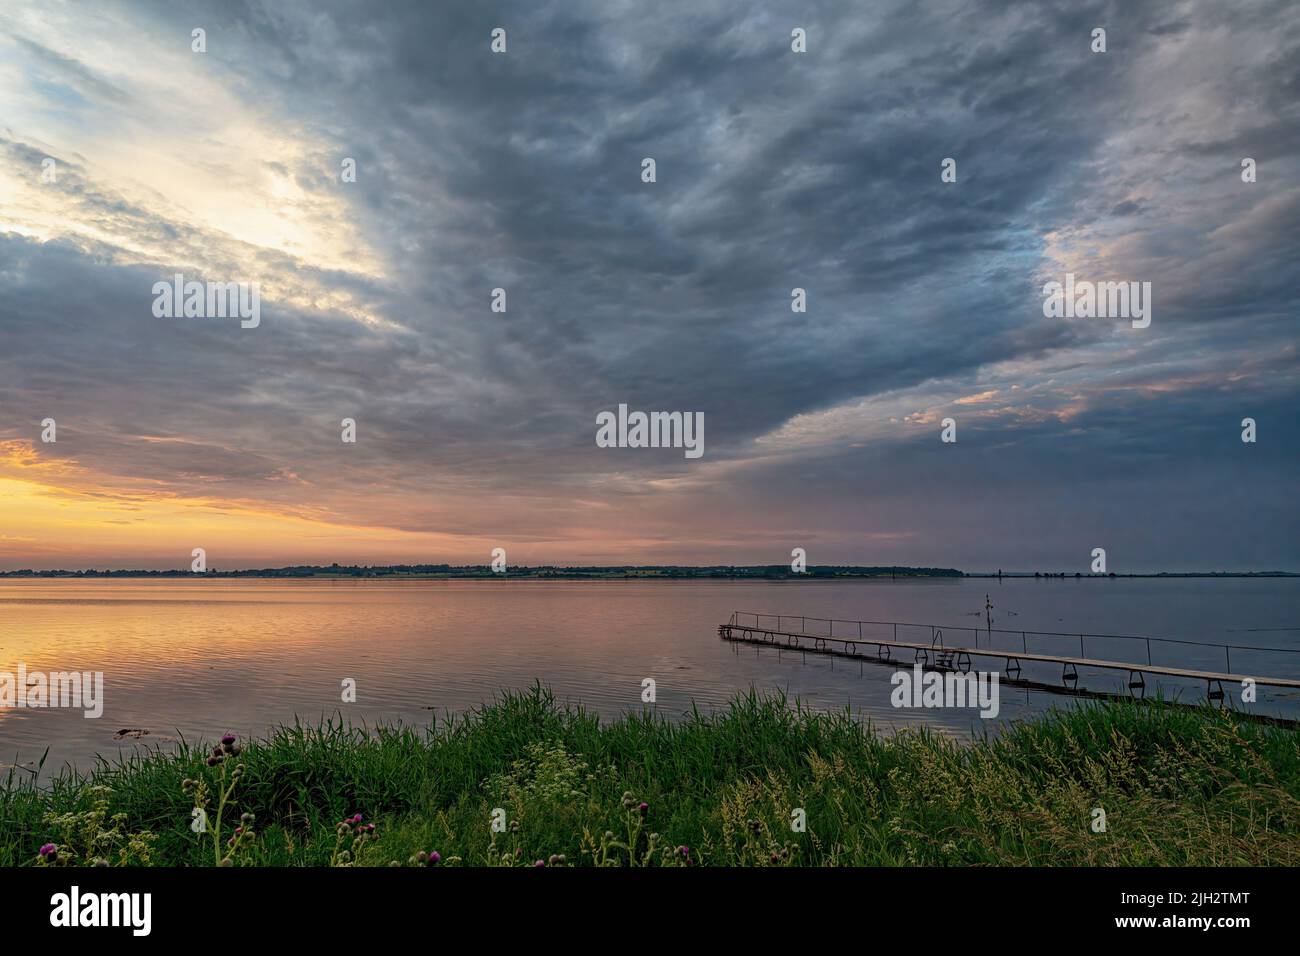 A view of faro island at sunset as veiwed from stubbekoping in Denmark. Stock Photo